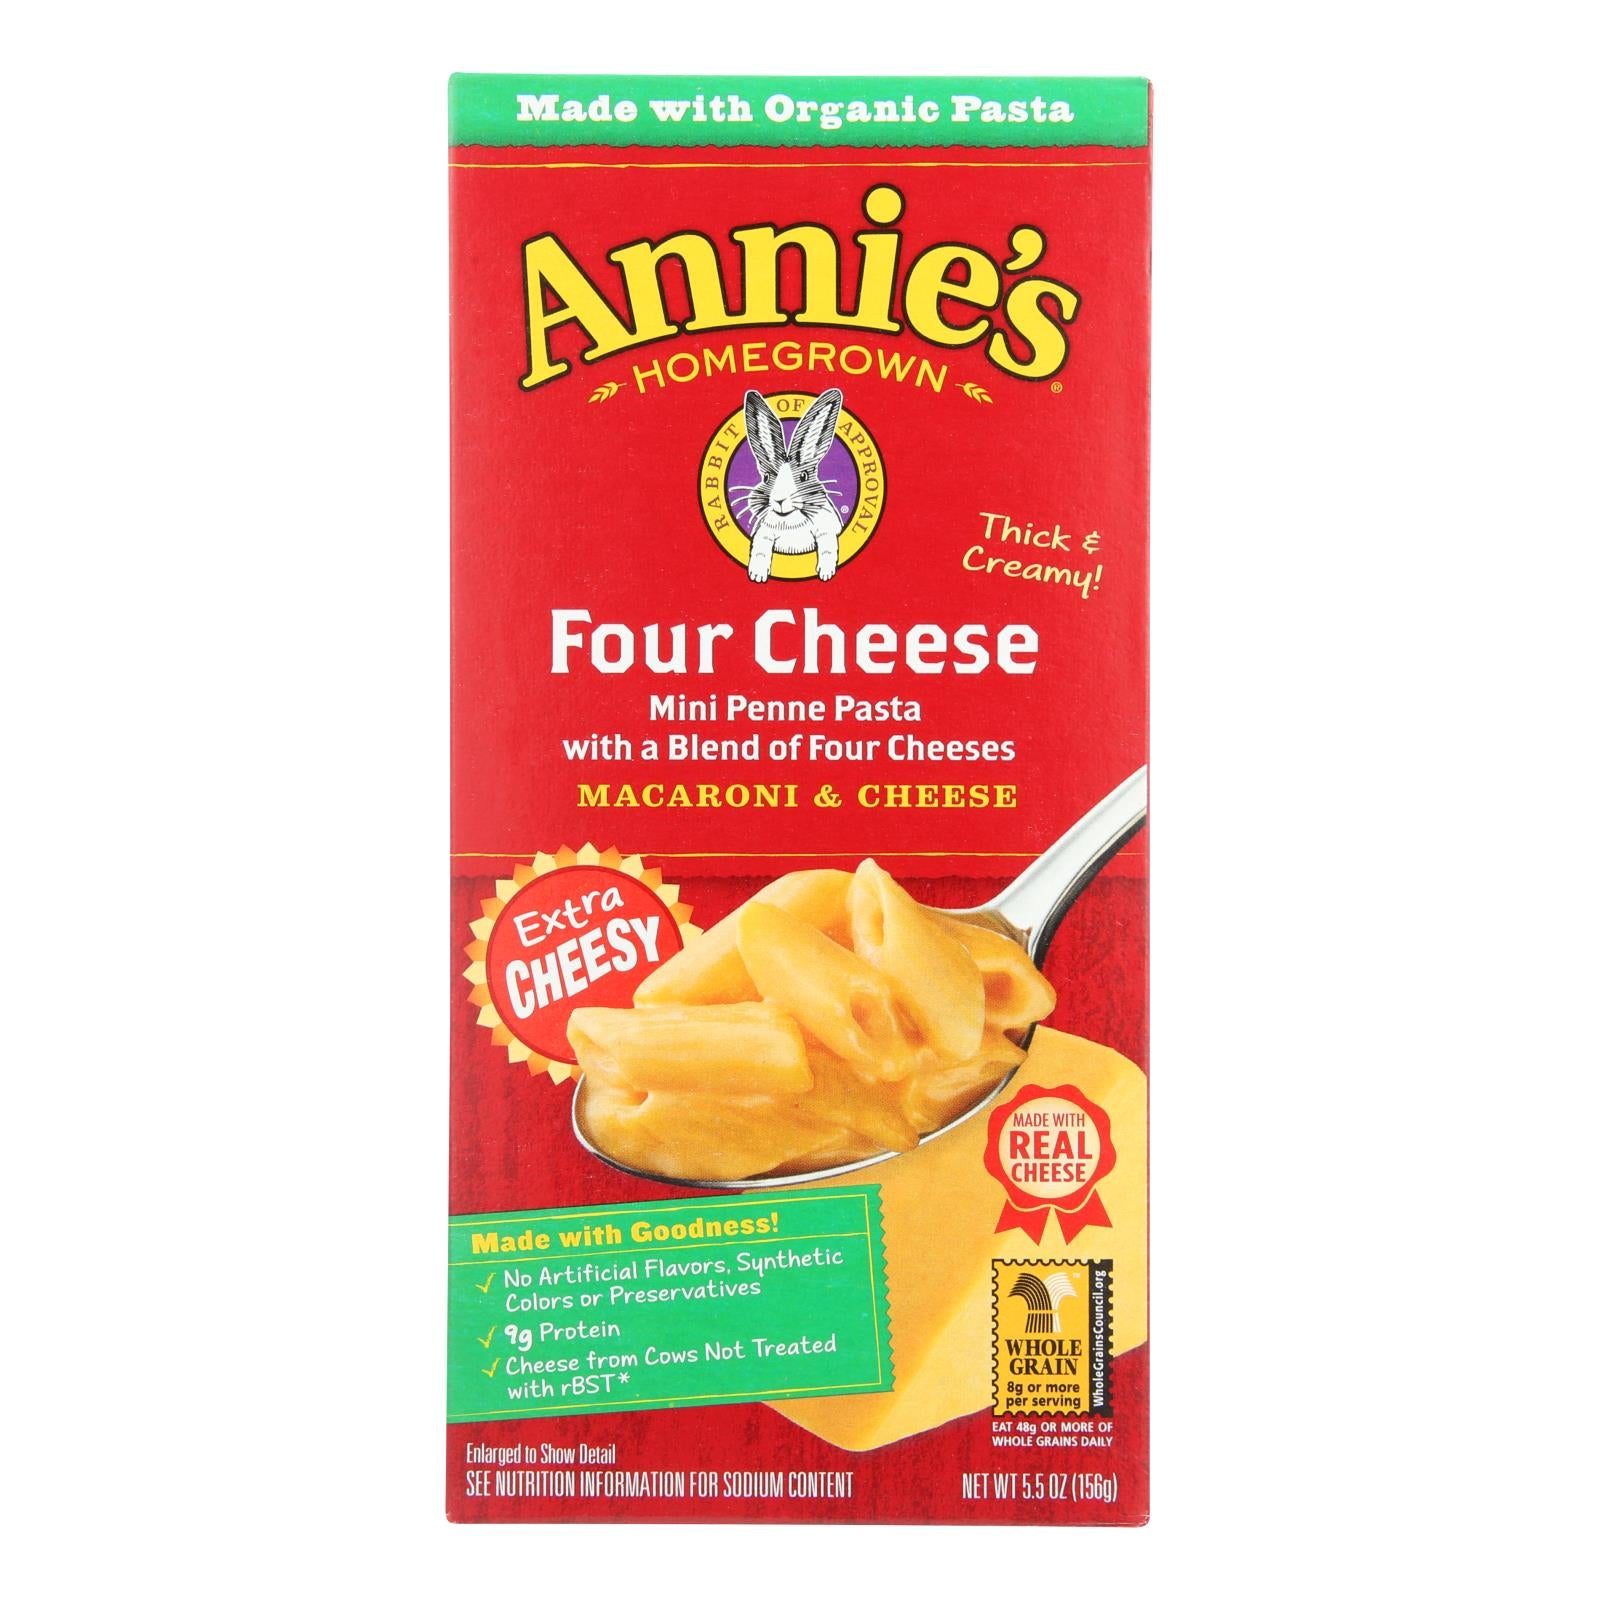 Annie'S Homegrown, Annie's Homegrown Four Cheese Macaroni and Cheese - Case of 12 - 5.5 oz. (Pack of 12)